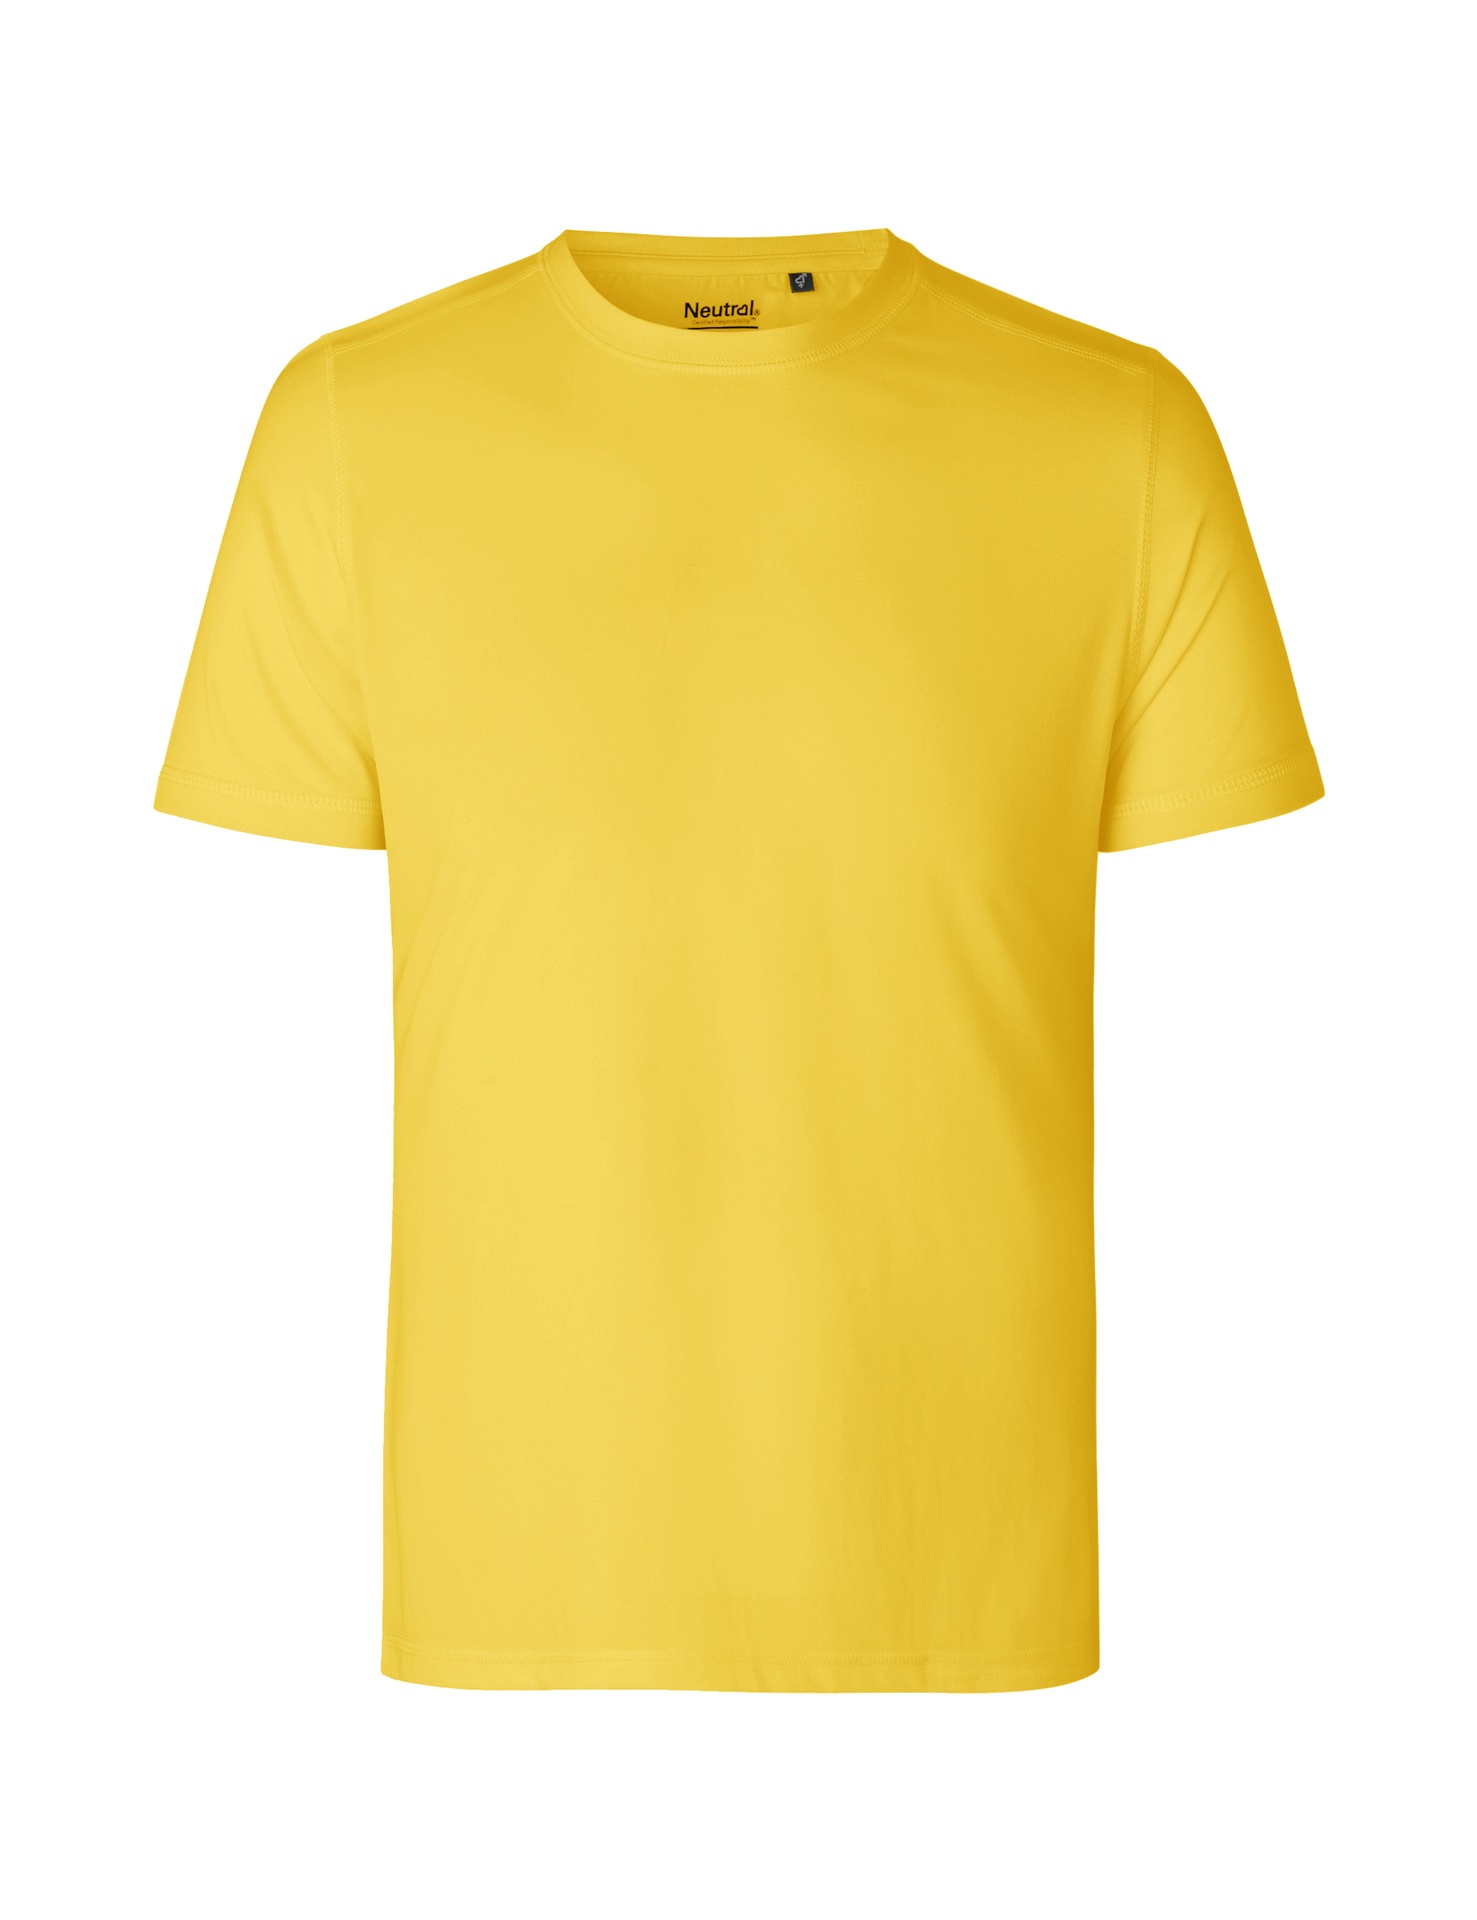 [PR/03814] Recycled Performance T-Shirt (Yellow 98, S)